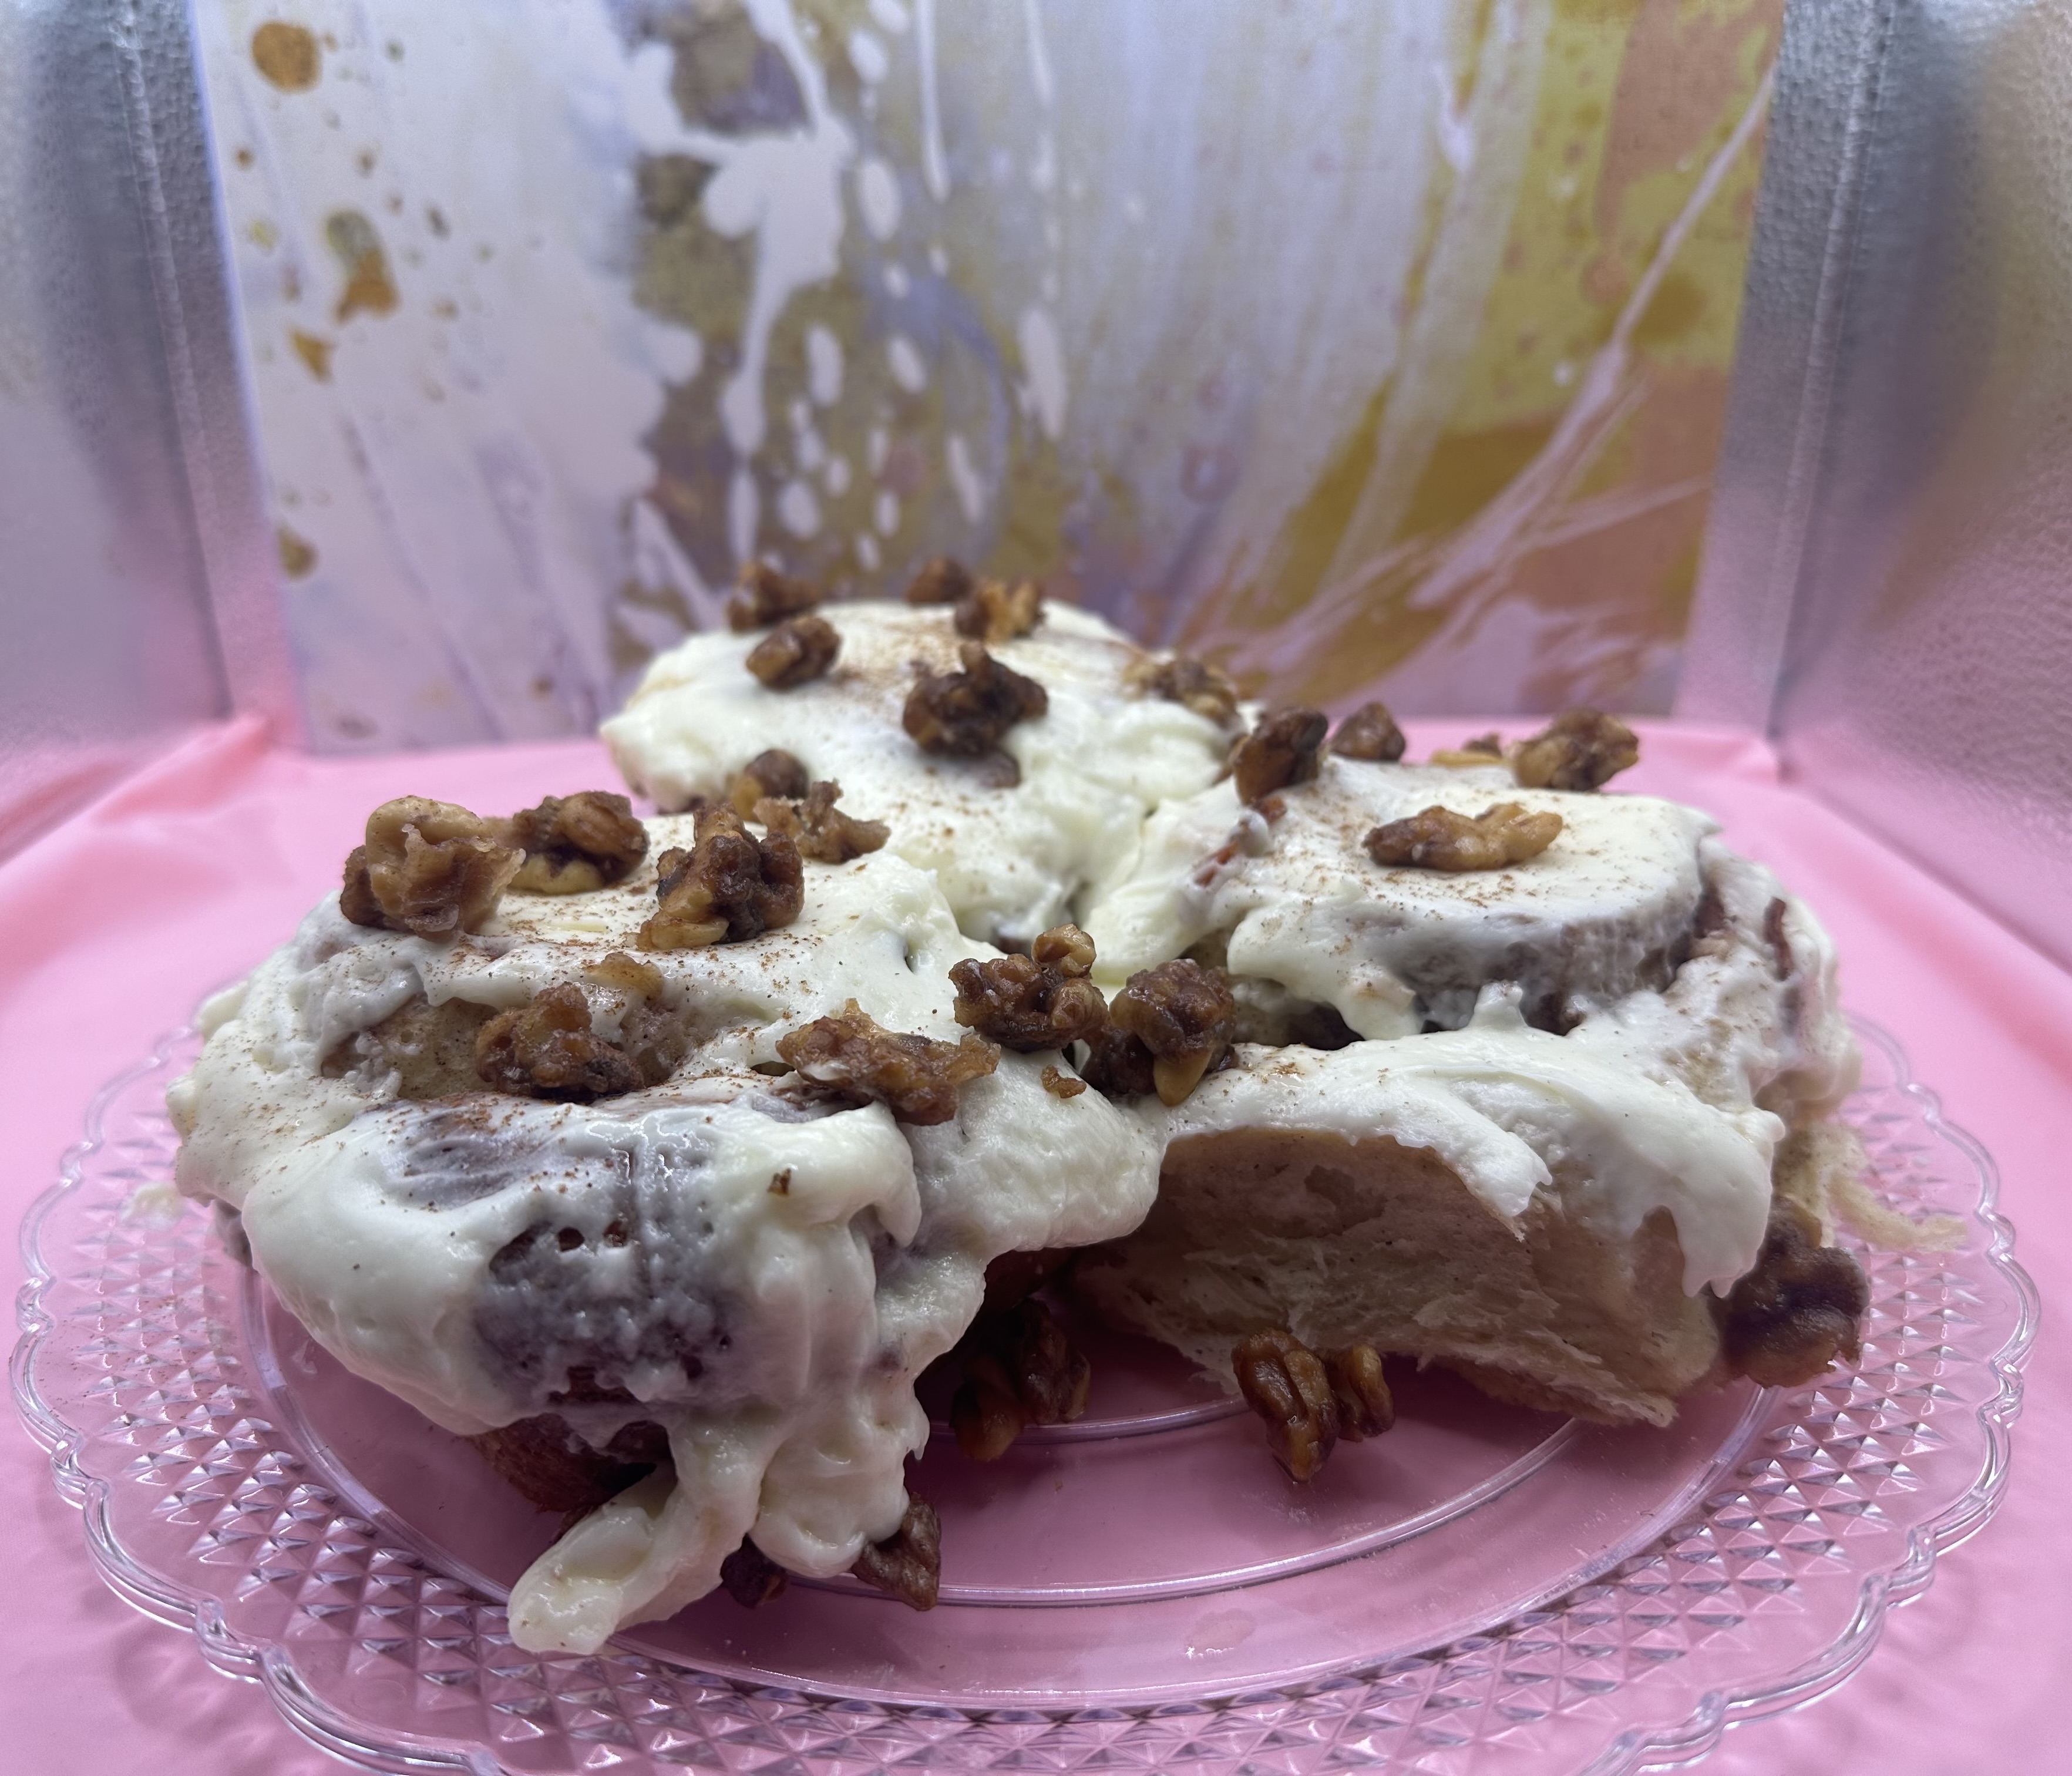 (6) Carrot cake cinnamon rolls with candied walnuts 